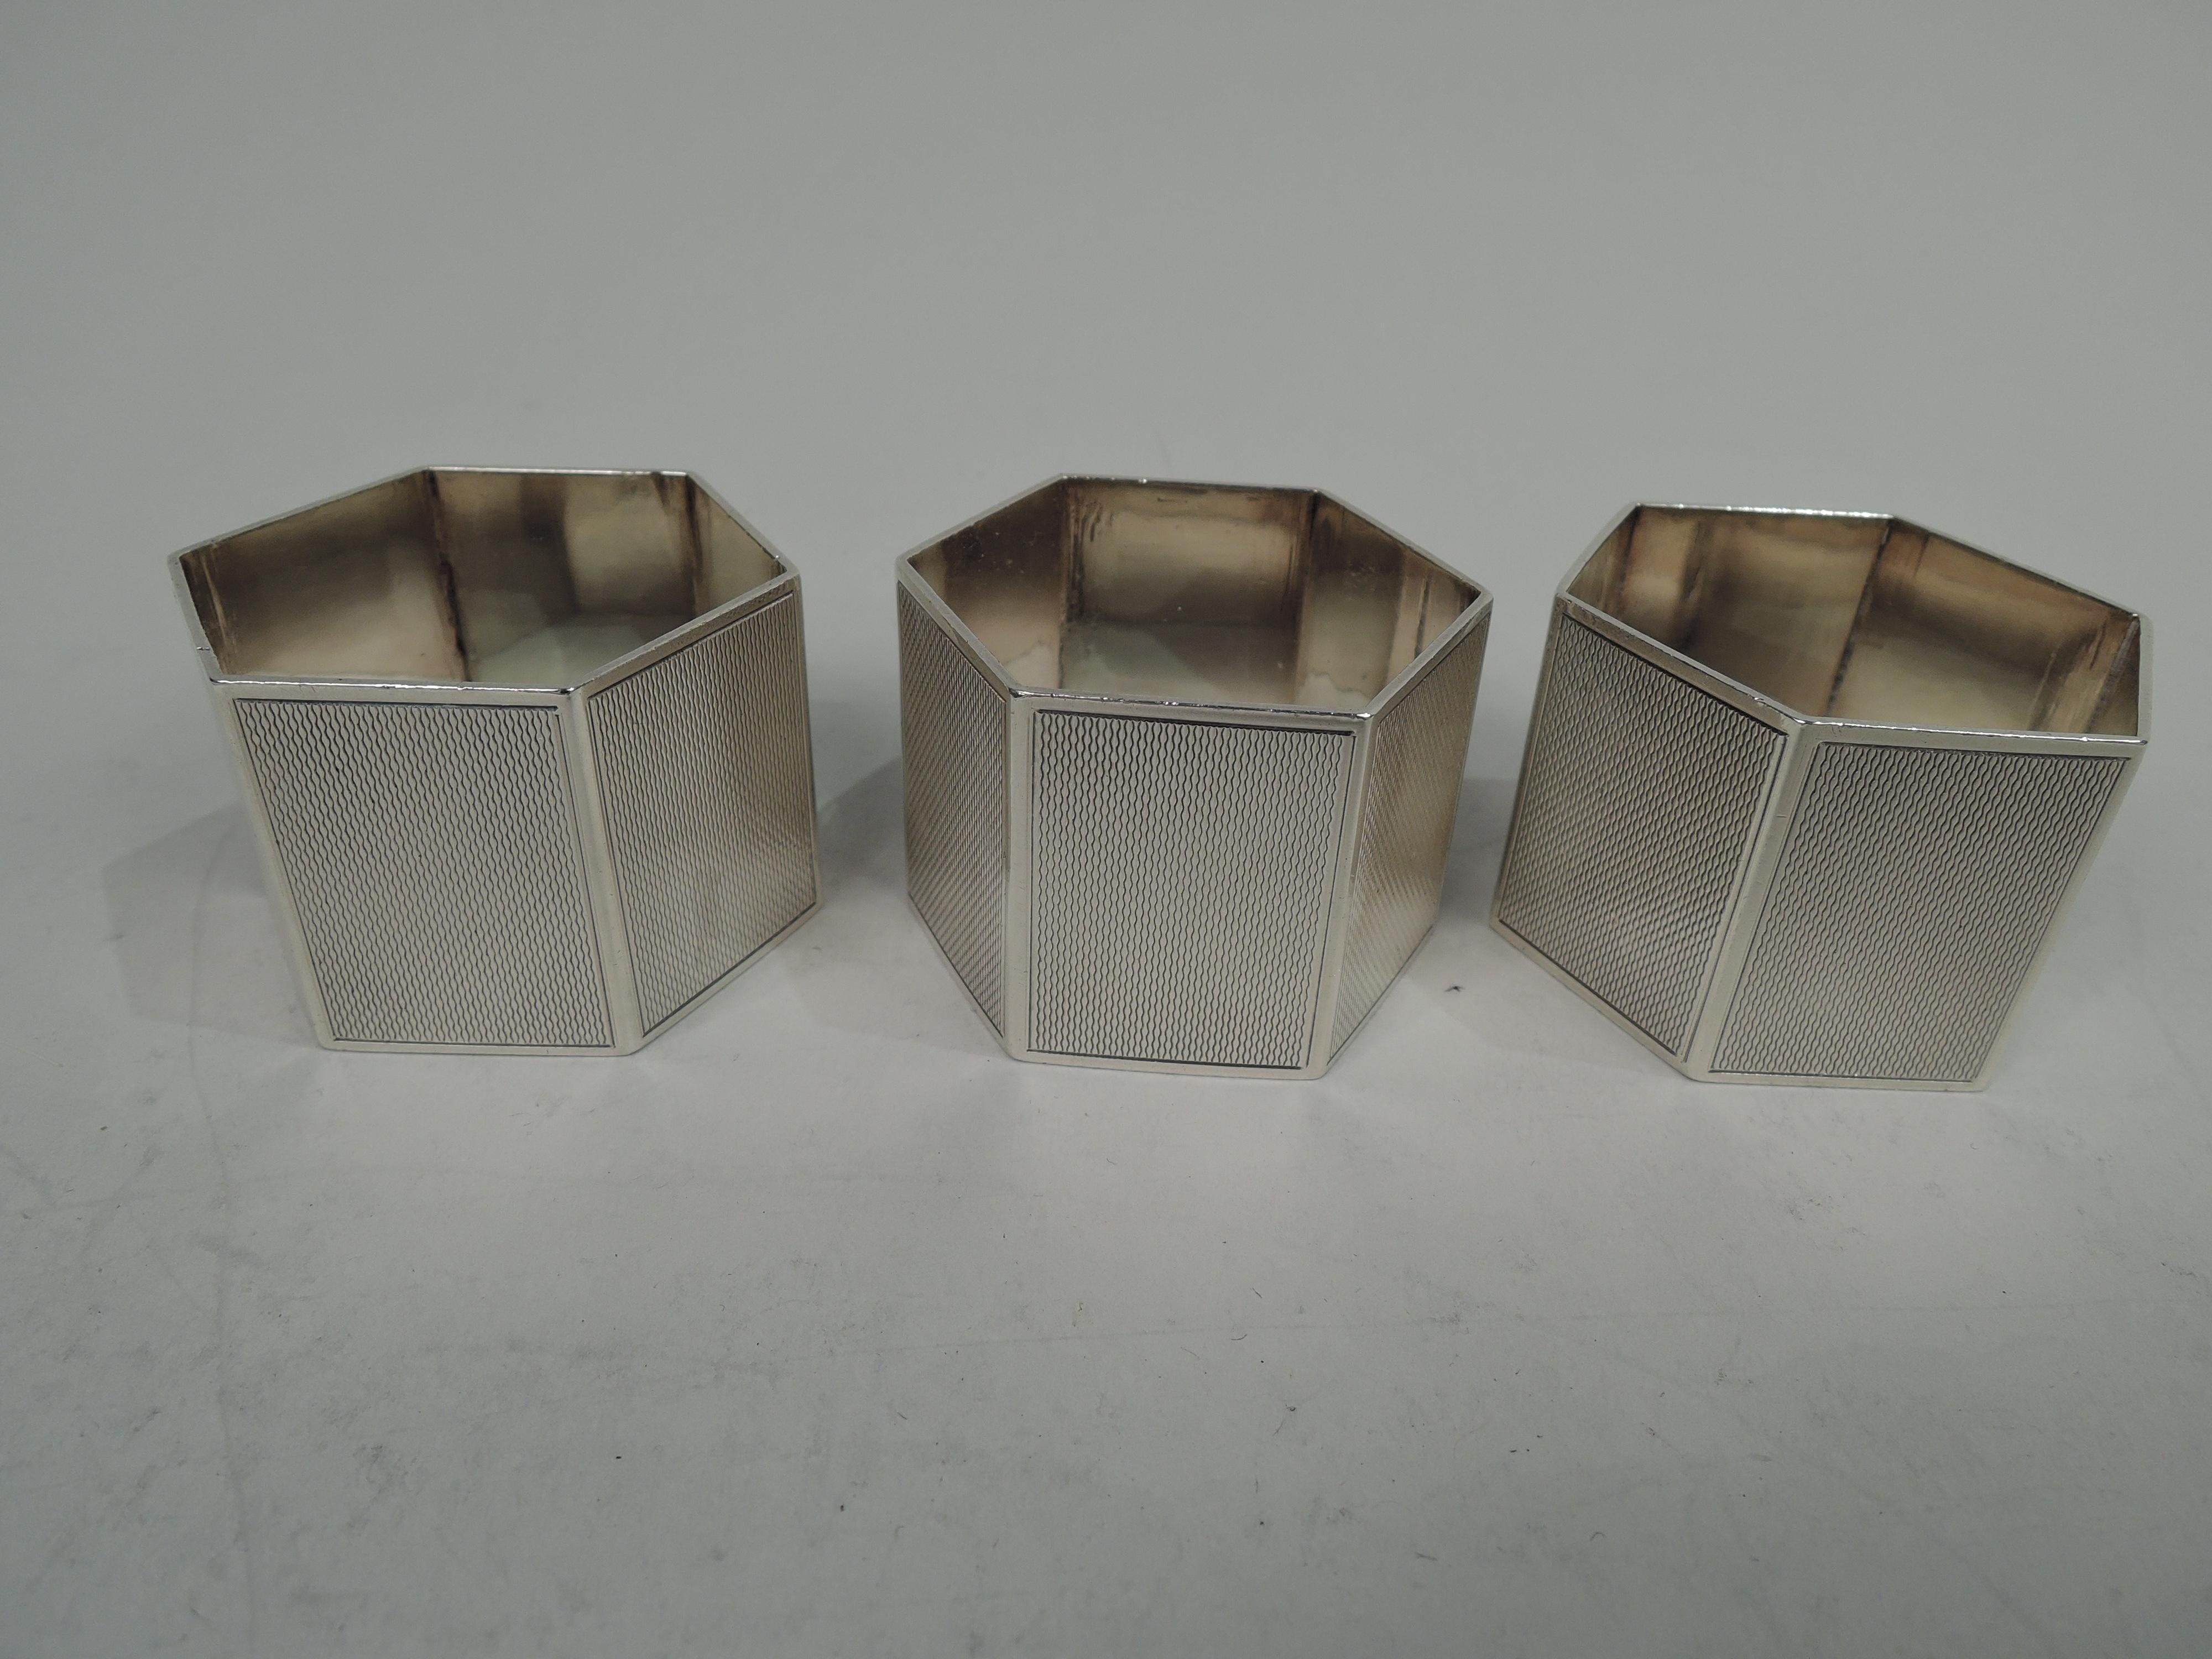 Set of 3 George VI sterling silver napkin rings. Made by Turner & Simpson Ltd in Birmingham in 1939. Hexagonal with allover engine-turned ornament in thin plain frames. Letter block monogram on lined ground. Each has a different letter: F, G, and L.